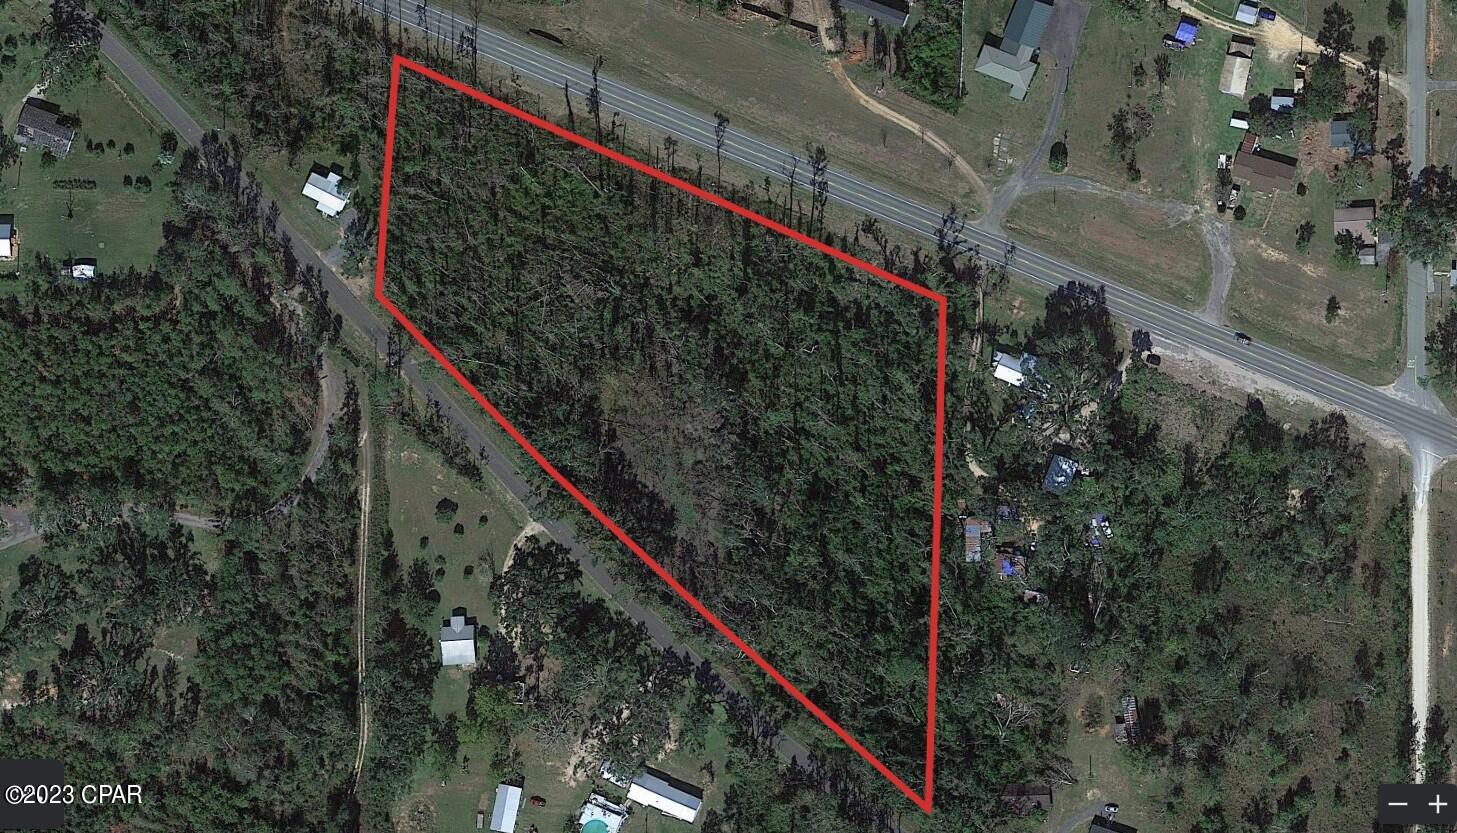 Very beautiful 7 acre parcel just inside the Sneads city limits. It features approximately 700 + feet of Highway 90 frontage and over 900 feet of Keevers road paved frontage. There is access to city water on Keevers road side as well.